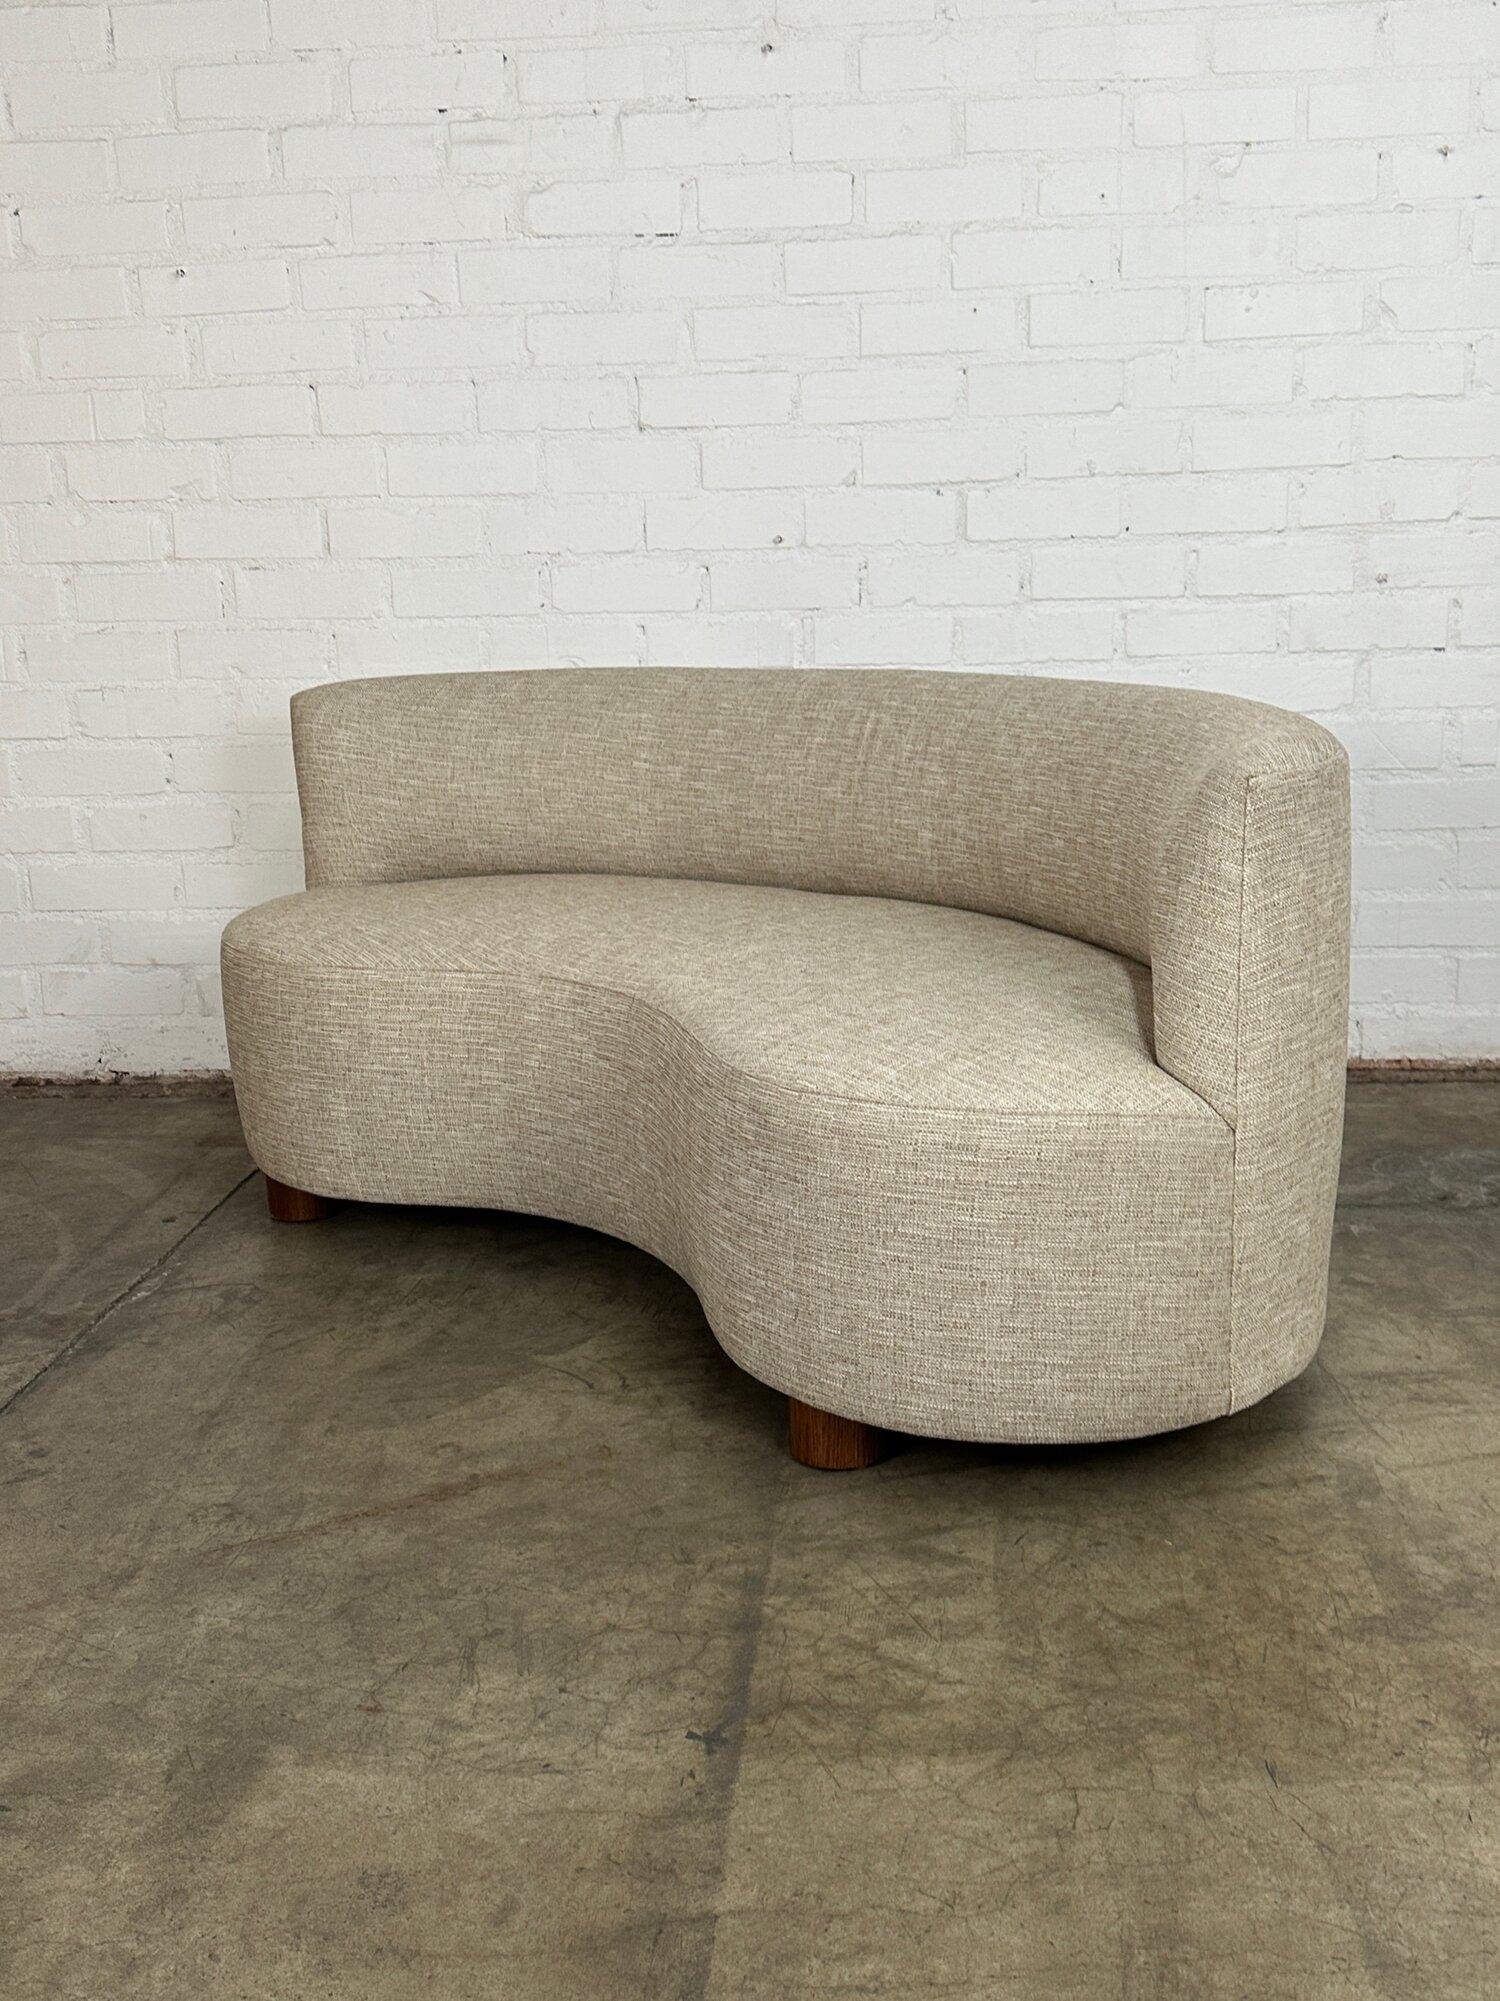 Fabric One of One Handcrafted Kidney Sofa